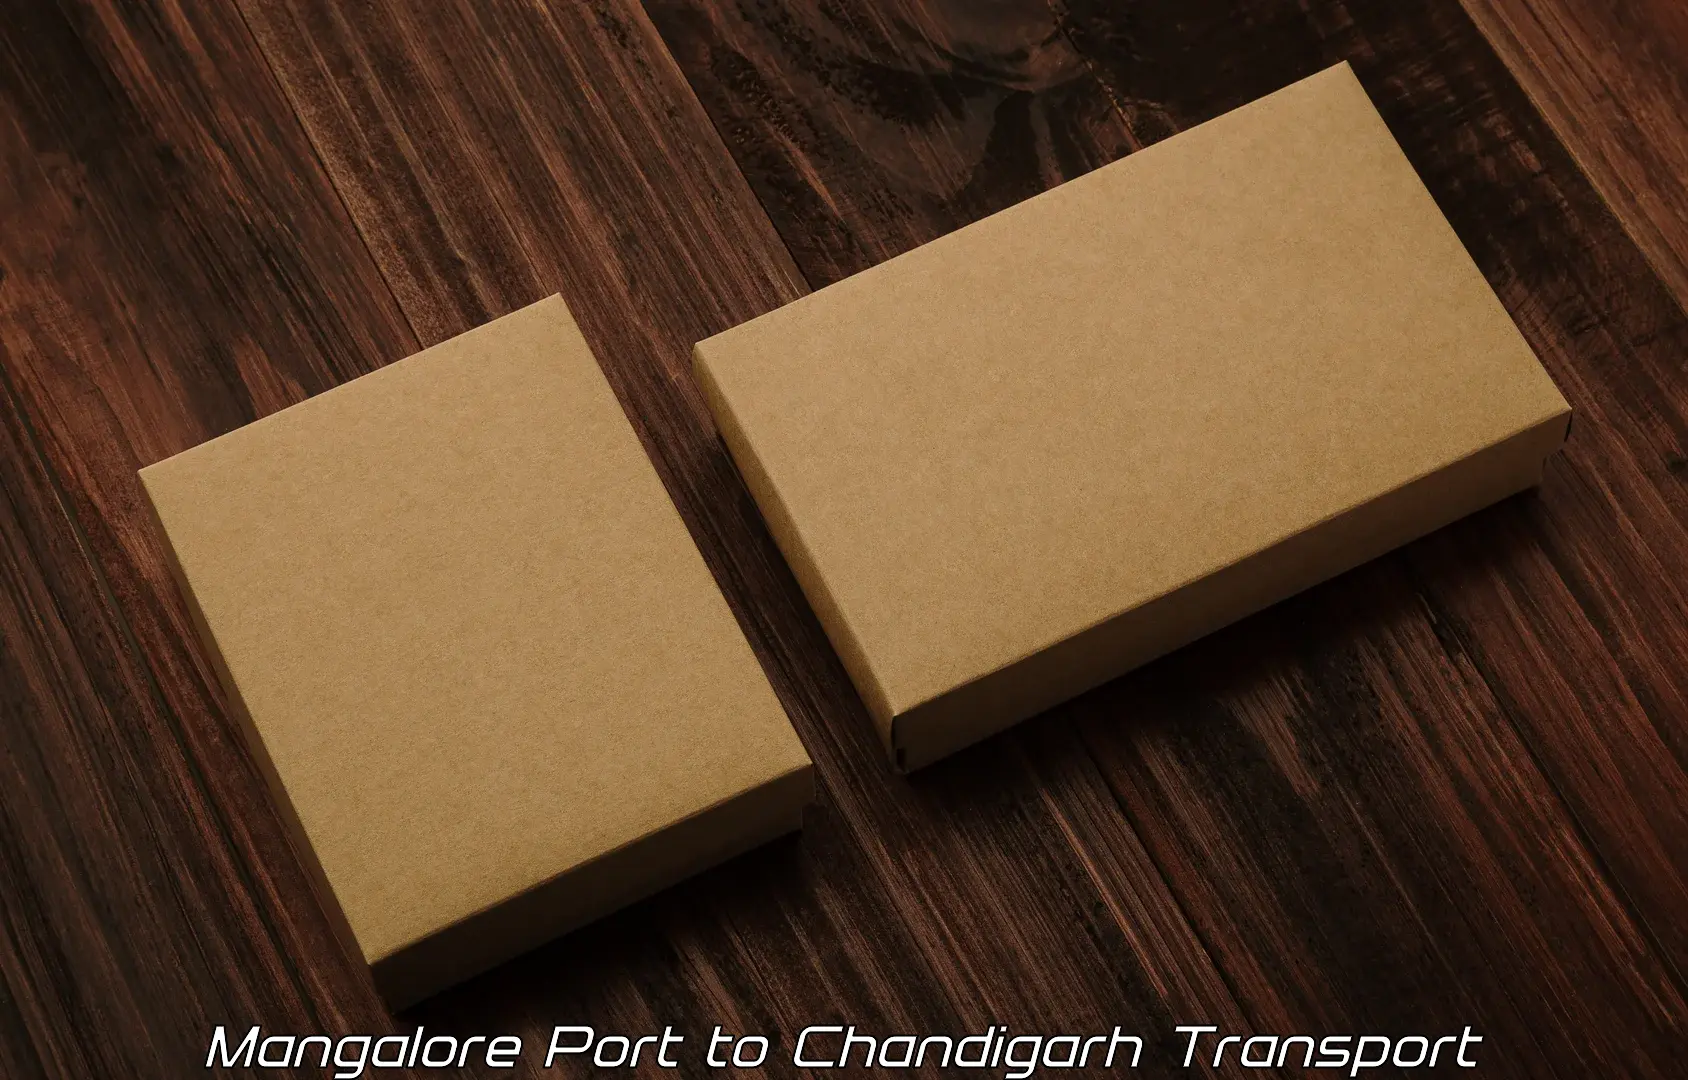 Truck transport companies in India Mangalore Port to Chandigarh